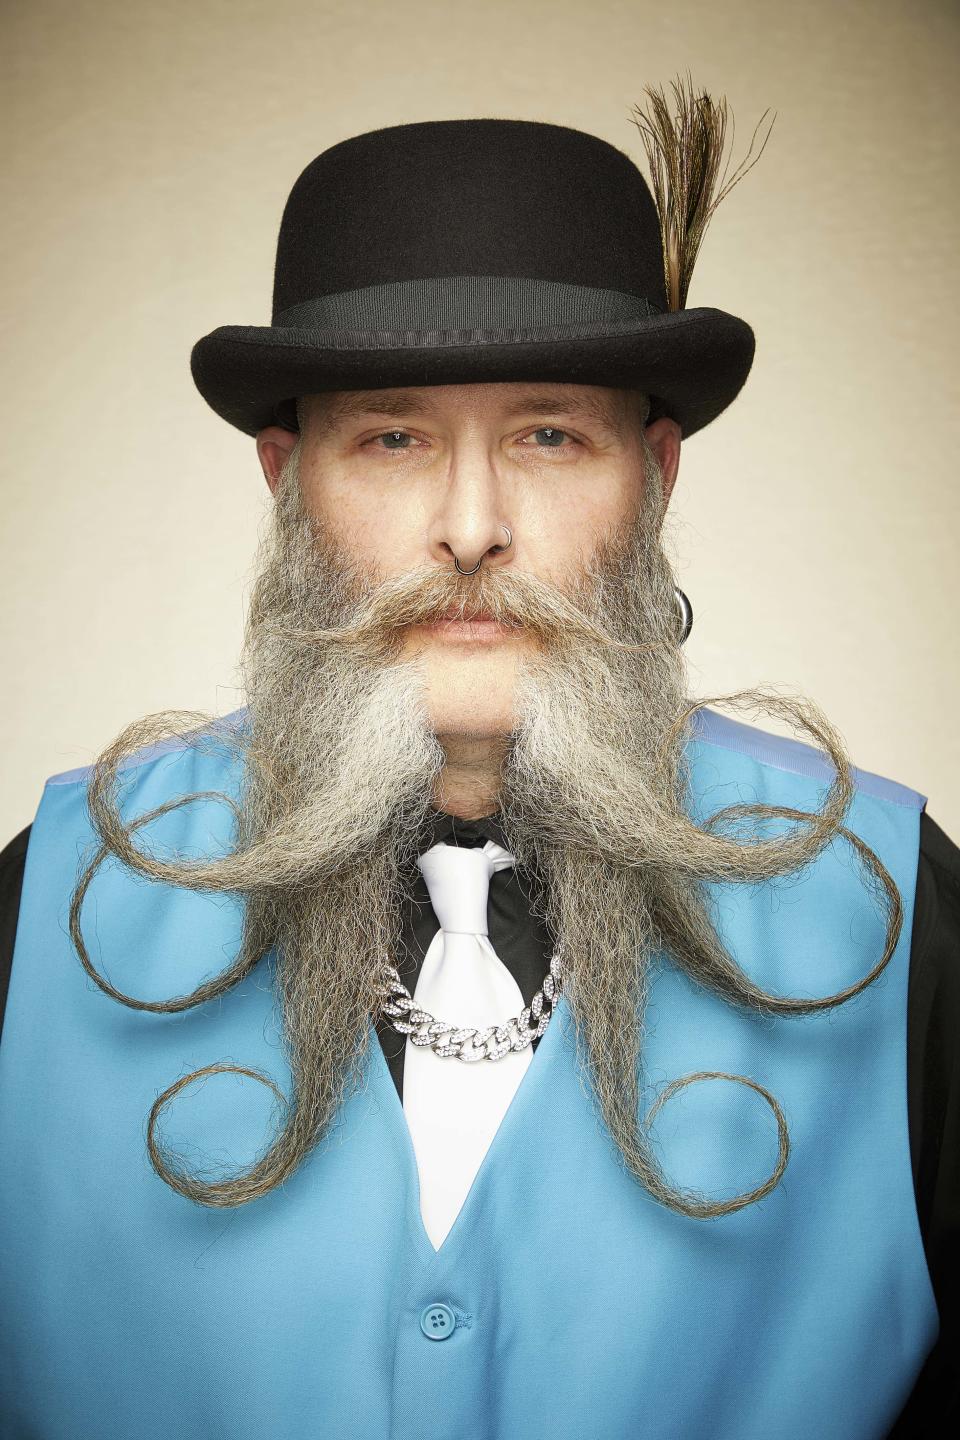 Against the gentleman's blue waistcoat, this facial hair resembles a squid. [Photo: Caters]